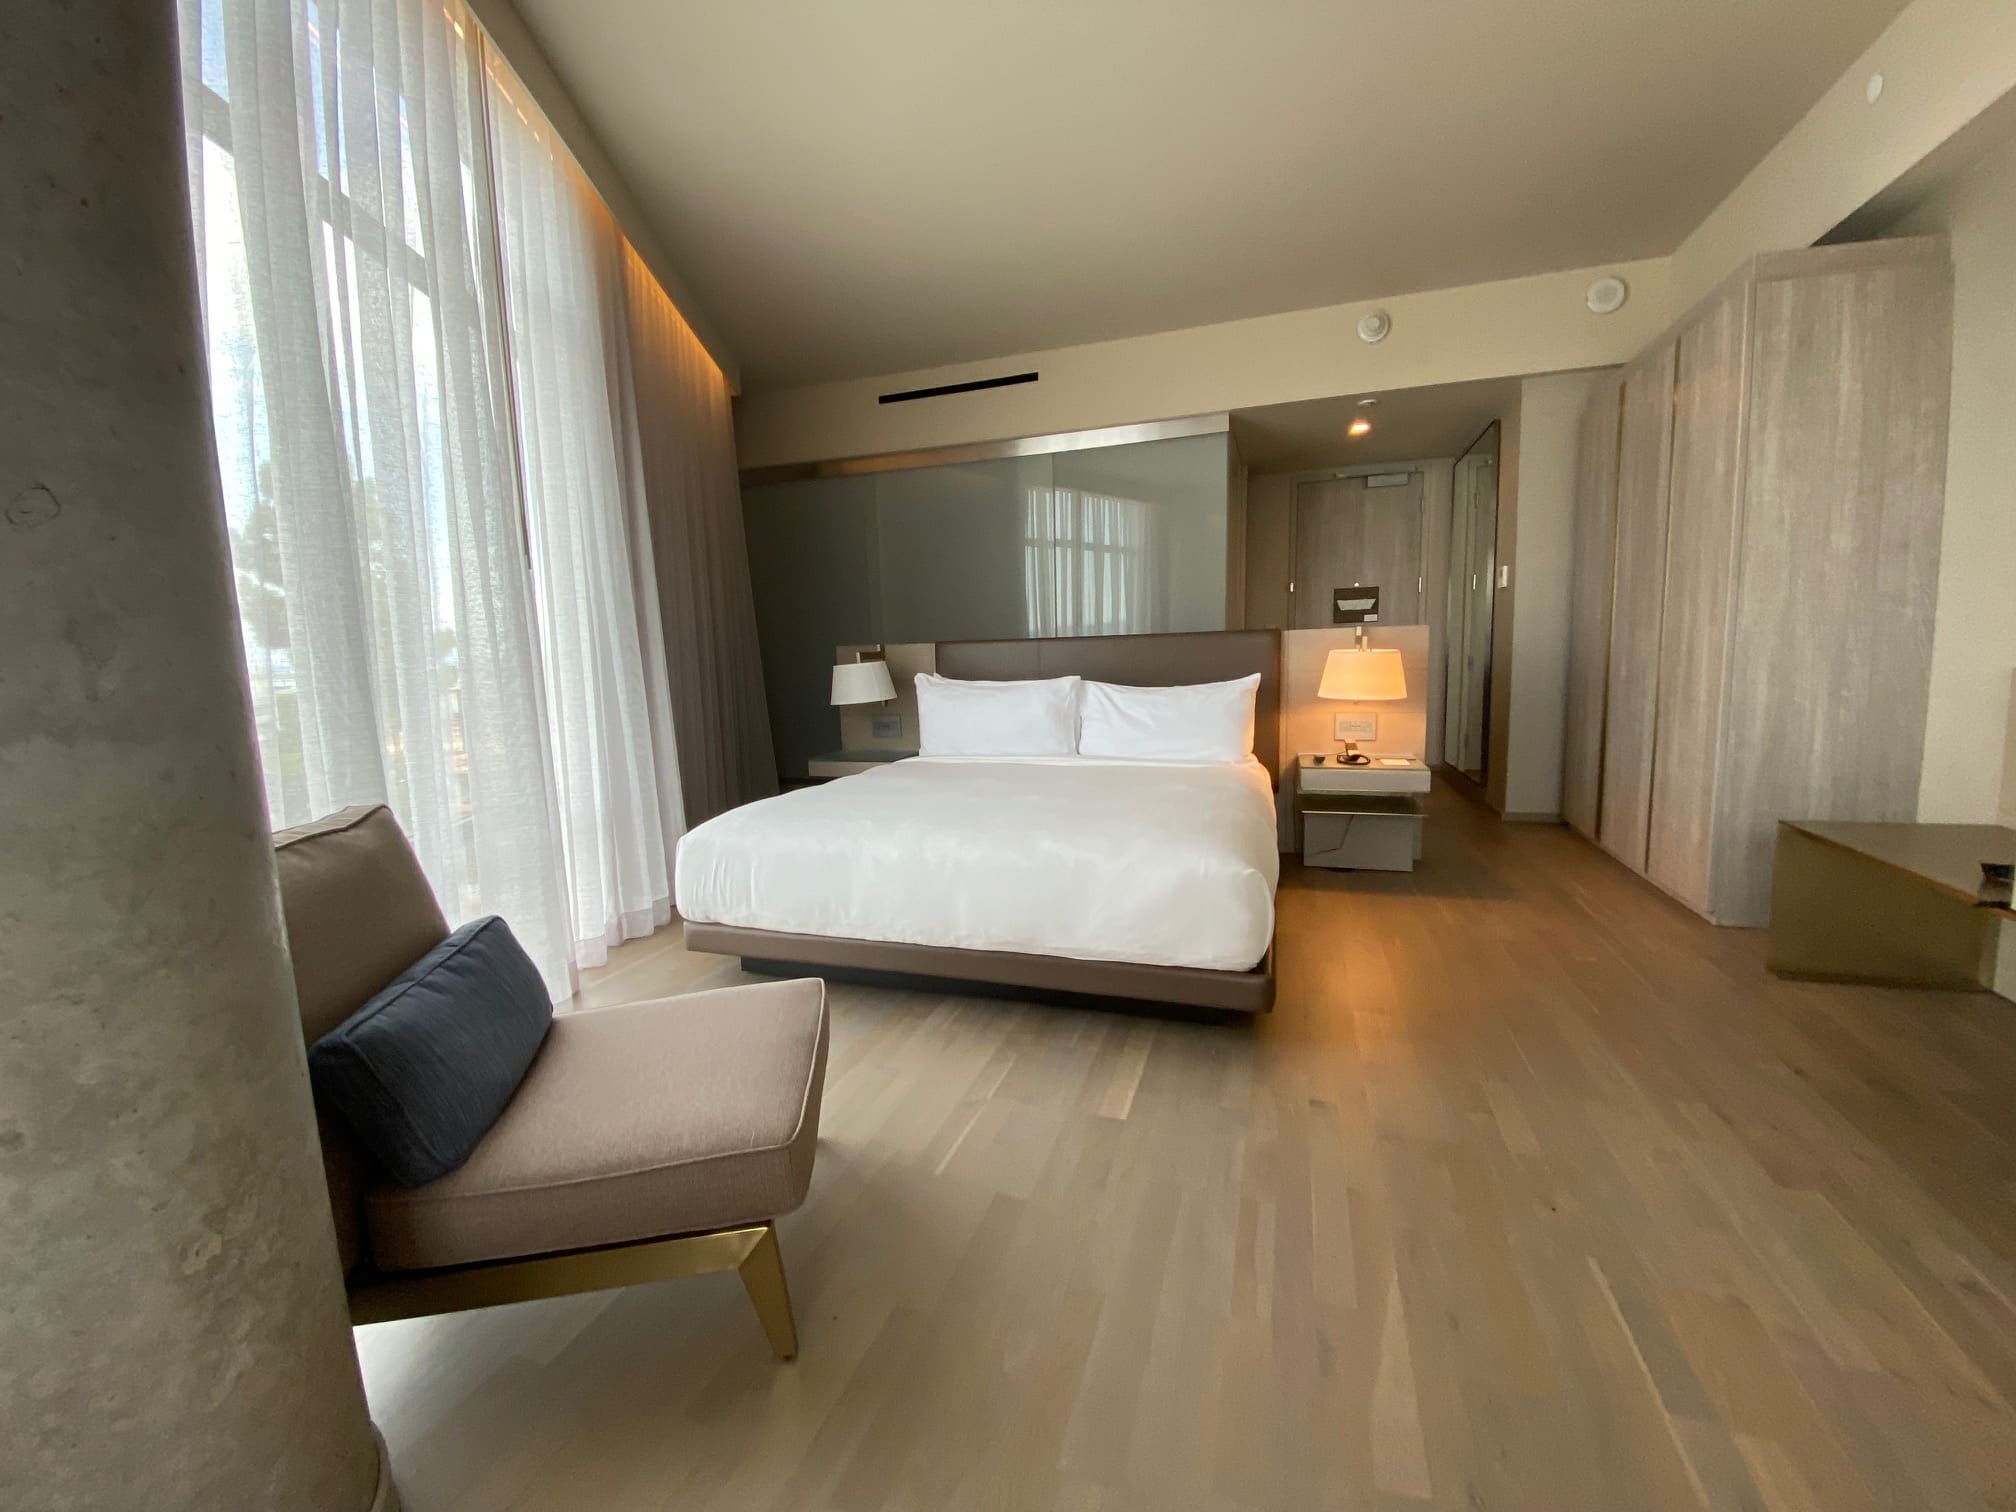 Tetra Hotel guest rooms on Travel Squire